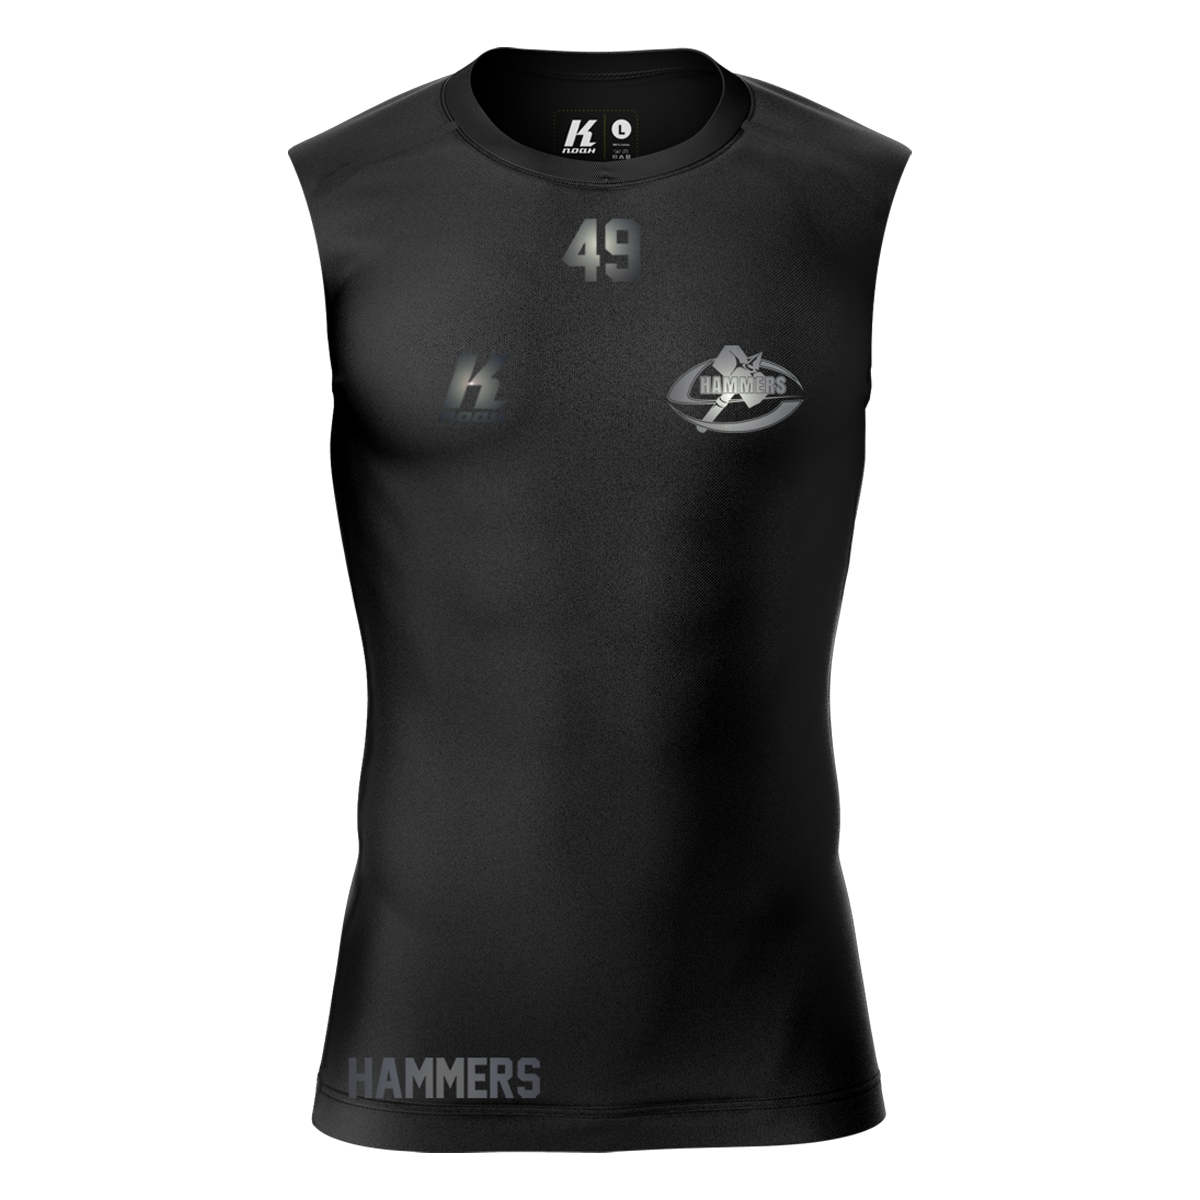 S-Hammers "Blackline" K.Tech Compression Sleeveless Shirt with Playernumber/Initials